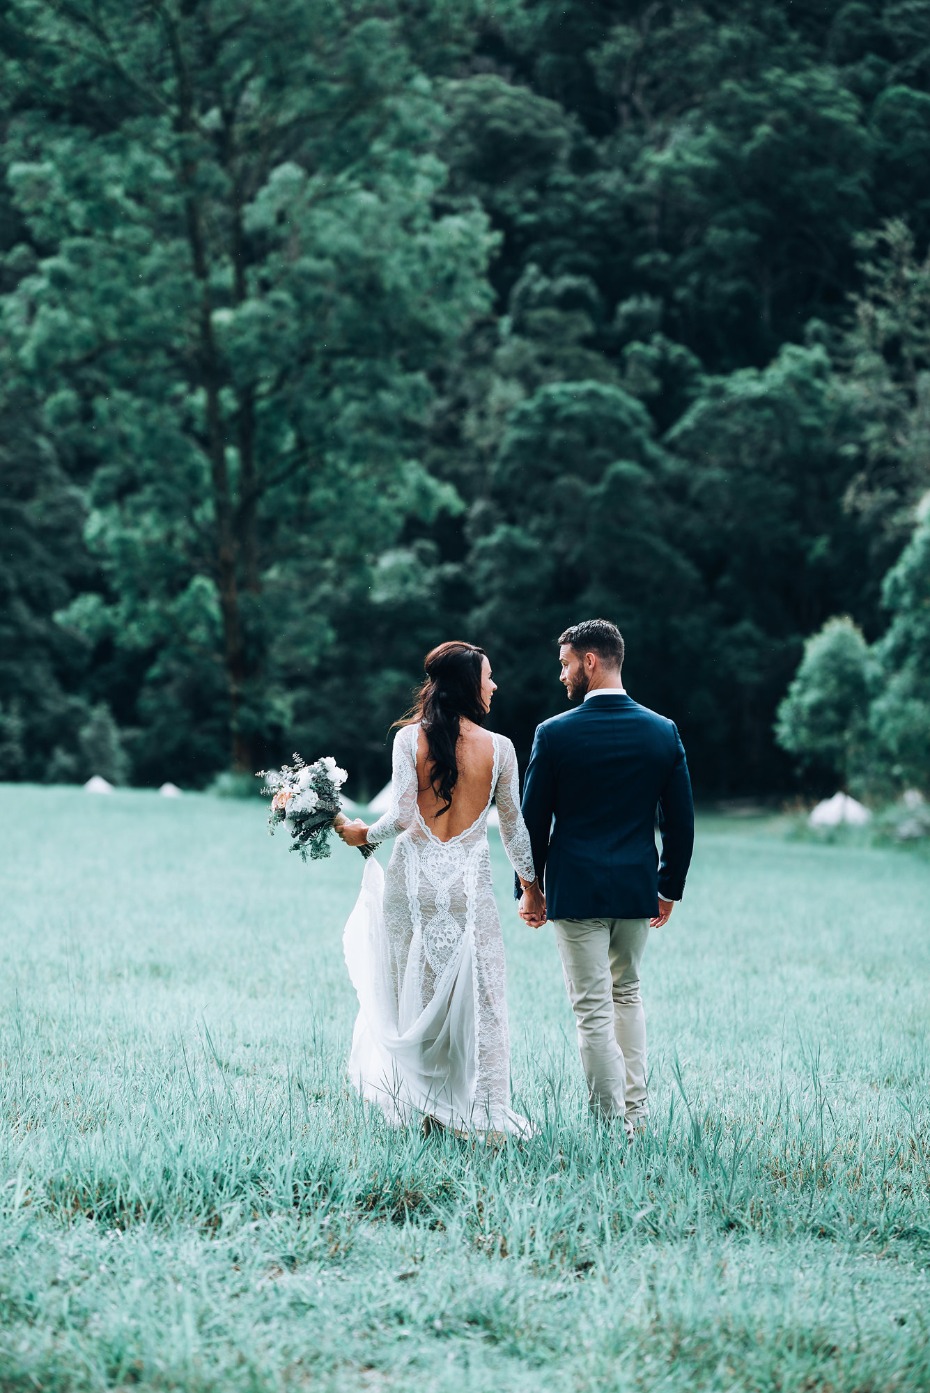 Low back lace wedding dress for the boho bride